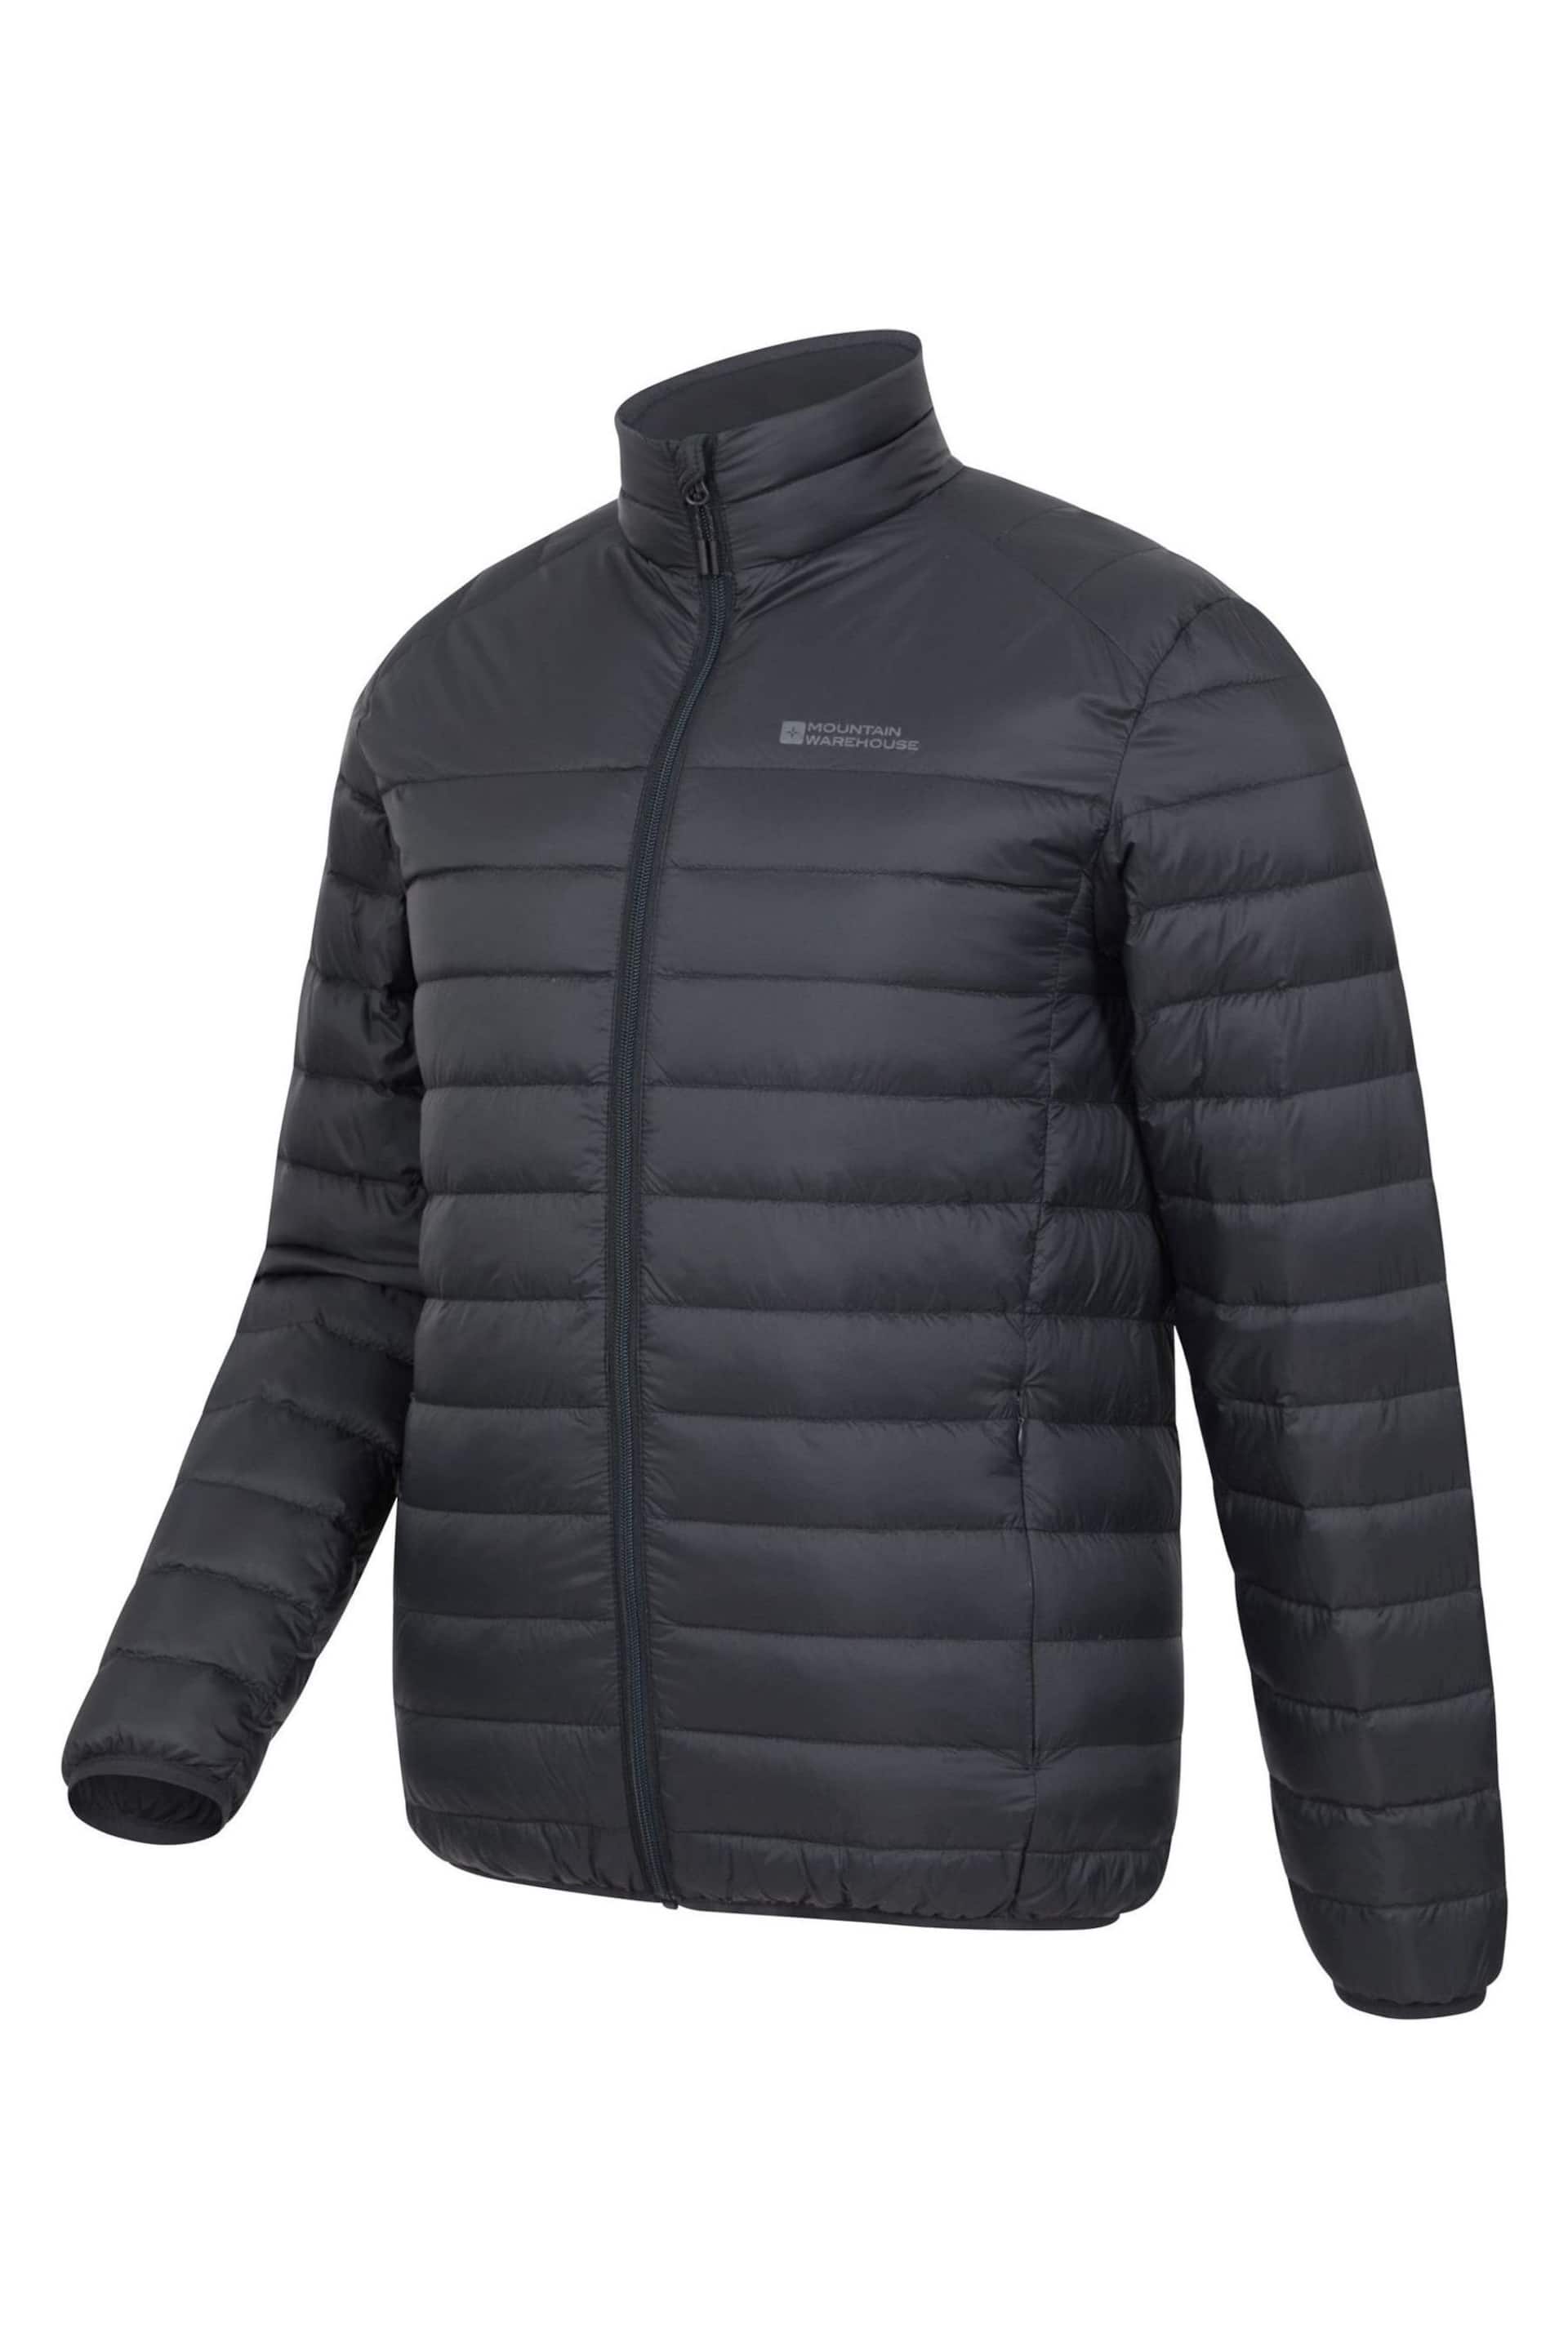 Mountain Warehouse Black Featherweight Down Mens Jacket - Image 3 of 5